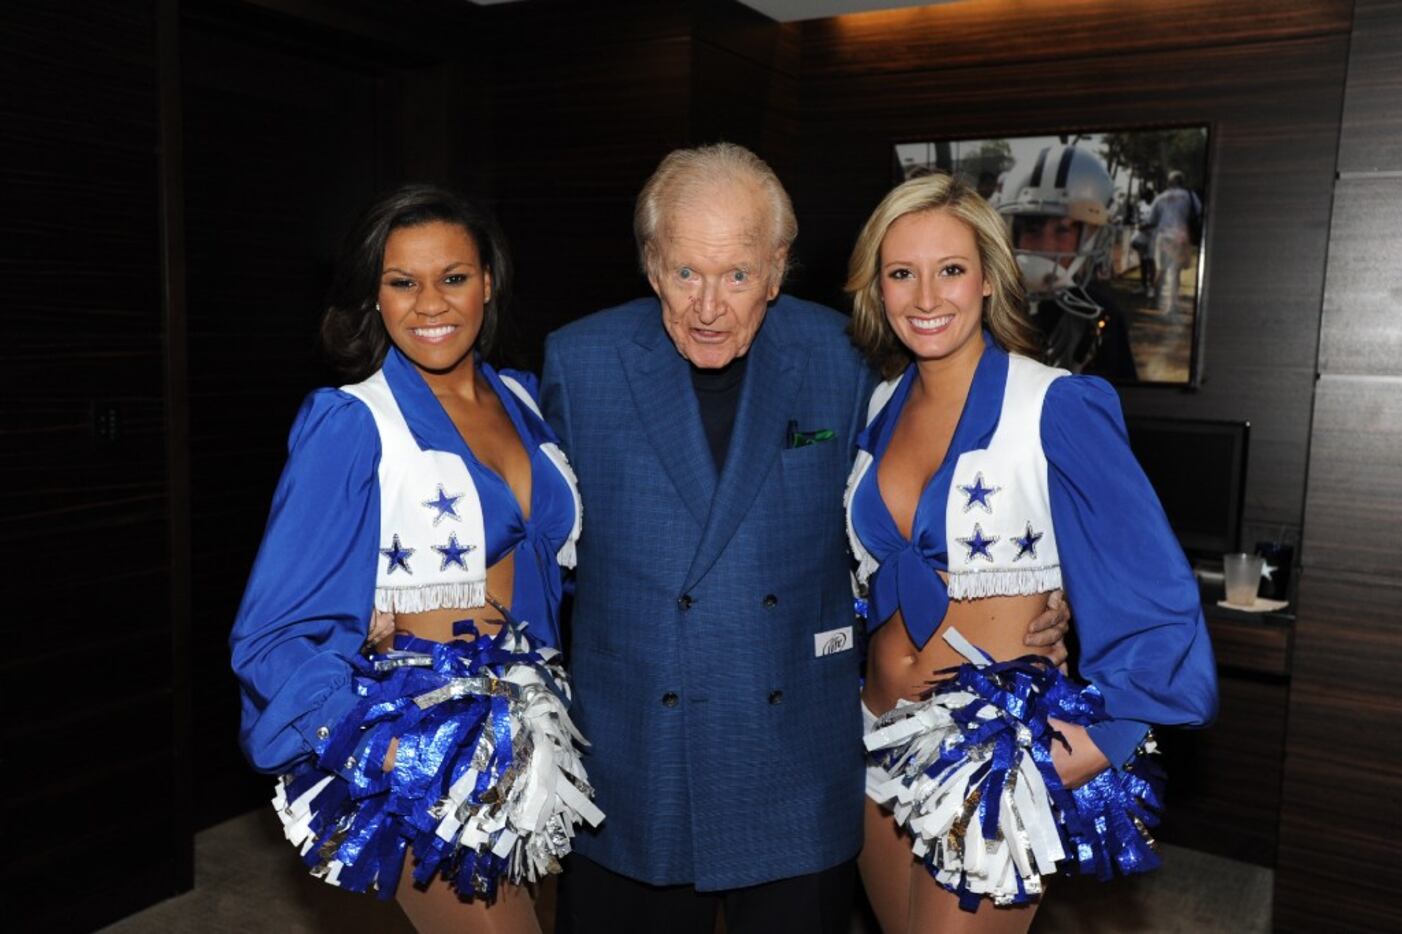 Oilman William P. "Bill" Moss was a big Cowboys fan. Here he posed with Dallas Cowboys...